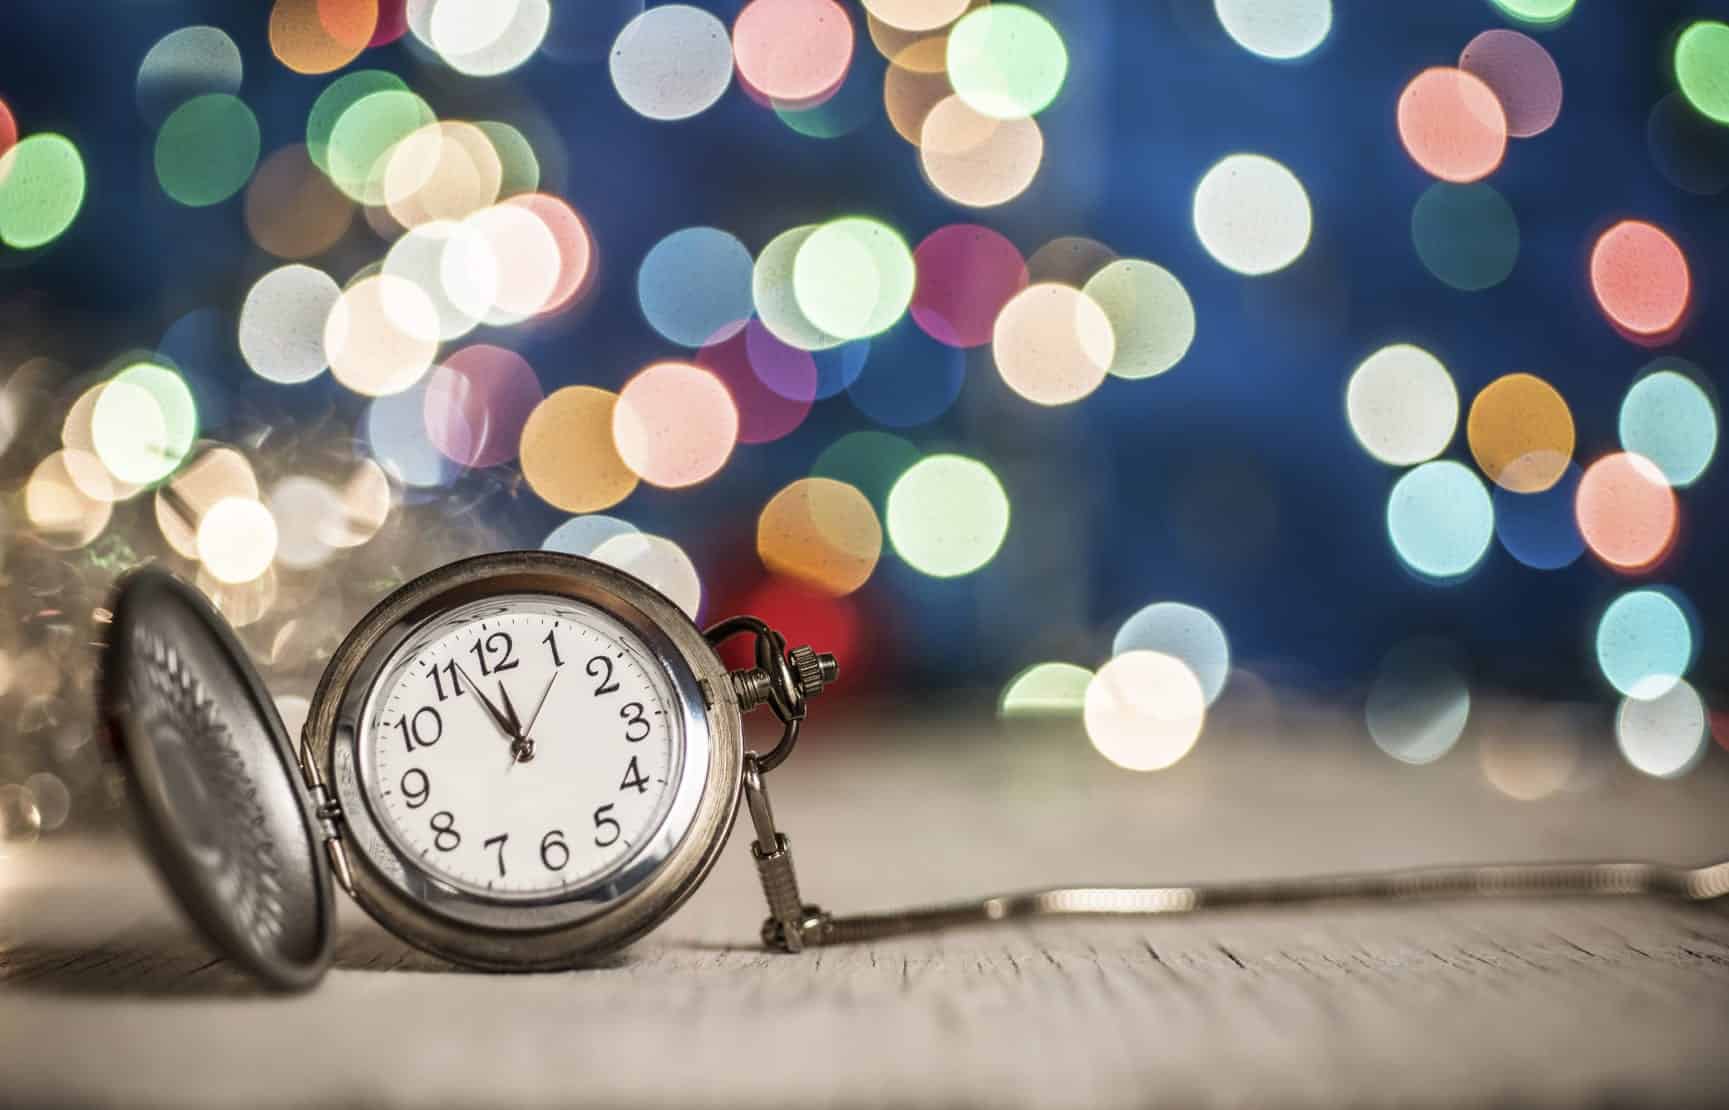 How to Make New Year’s Resolutions That Actually Stick